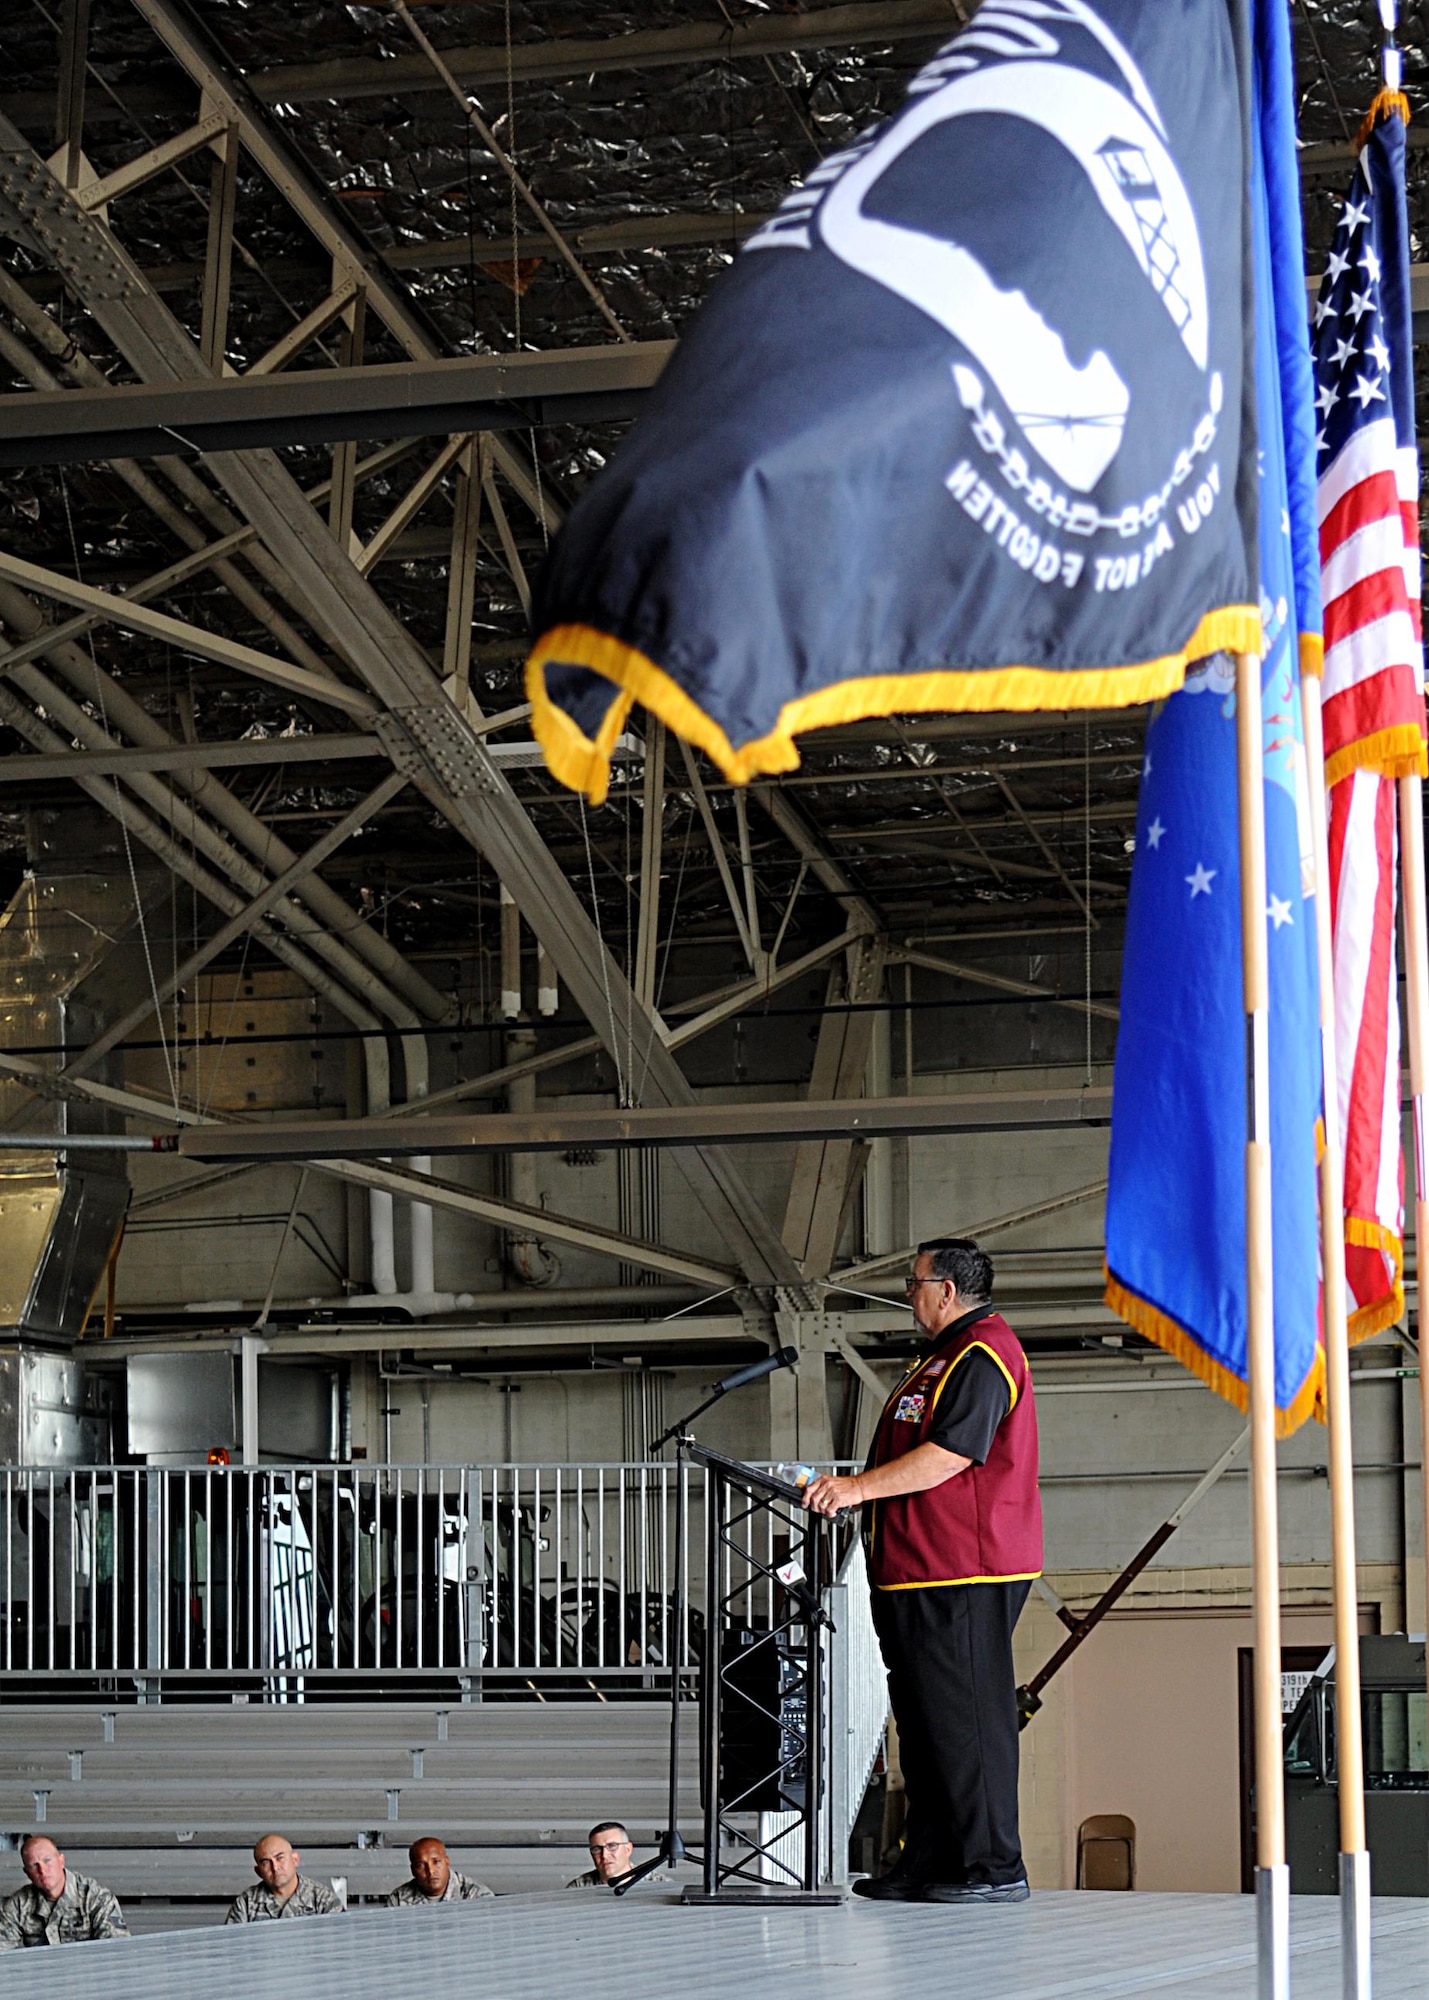 The POW/MIA flag waves in the wind as Capt. William “Bill” Robinson, United States Air Force retired, speaks with Airmen August 18, 2016, on Grand Forks Air Force Base, N.D. Robinson spent nearly eight years as a POW in Vietnam, which is the longest time spent as a POW by any enlisted member. (U.S. Air Force photo by Senior Airman Ryan Sparks/Released)